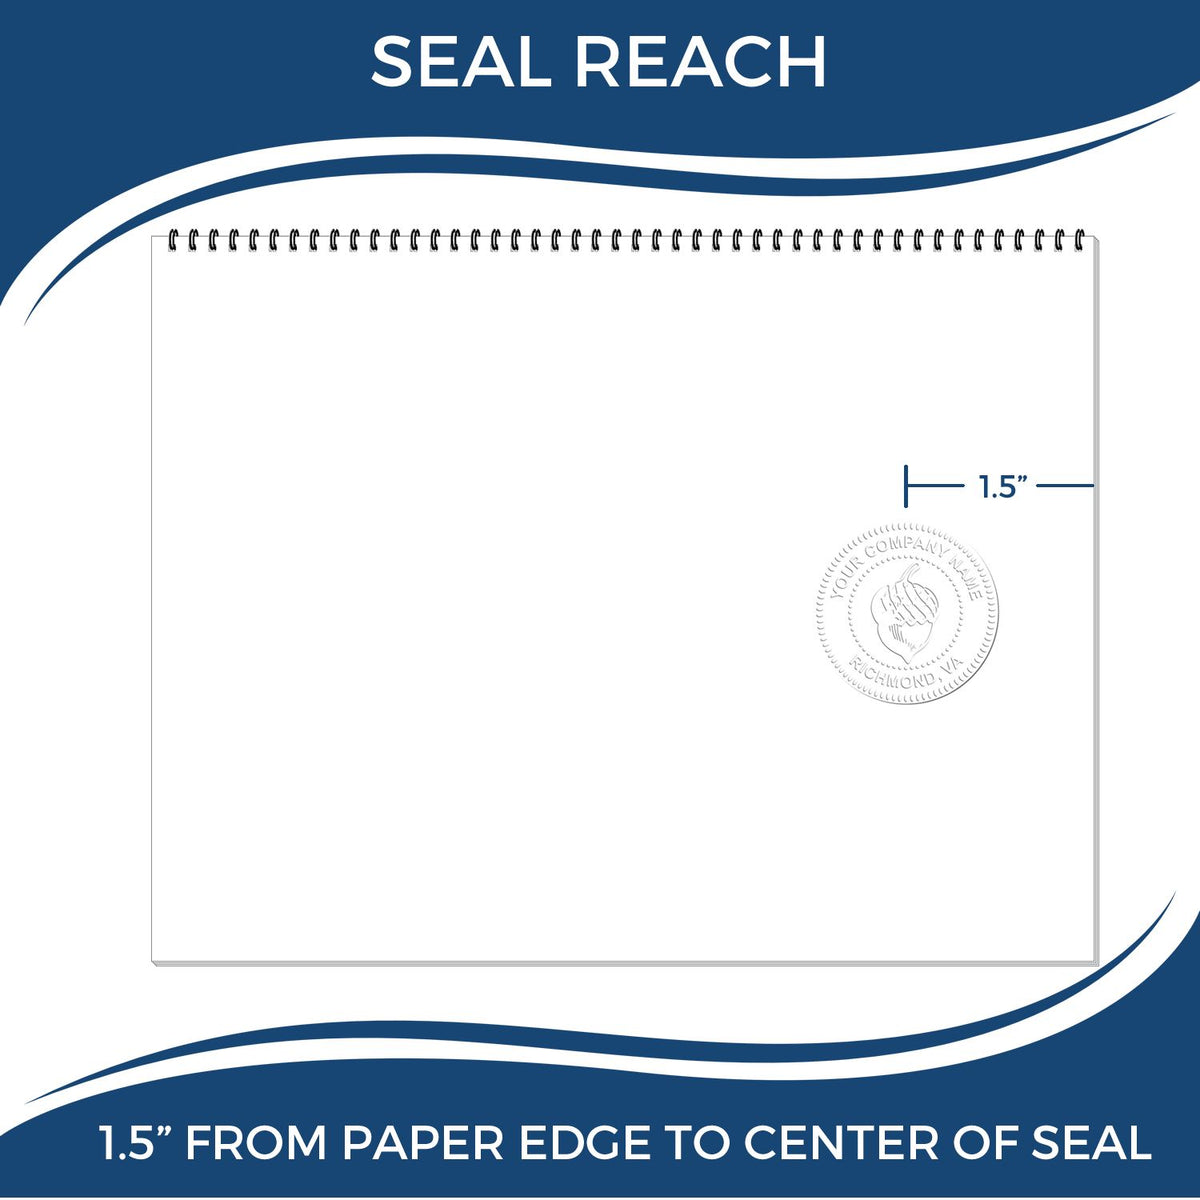 An infographic showing the seal reach which is represented by a ruler and a miniature seal image of the State of Connecticut Architectural Seal Embosser